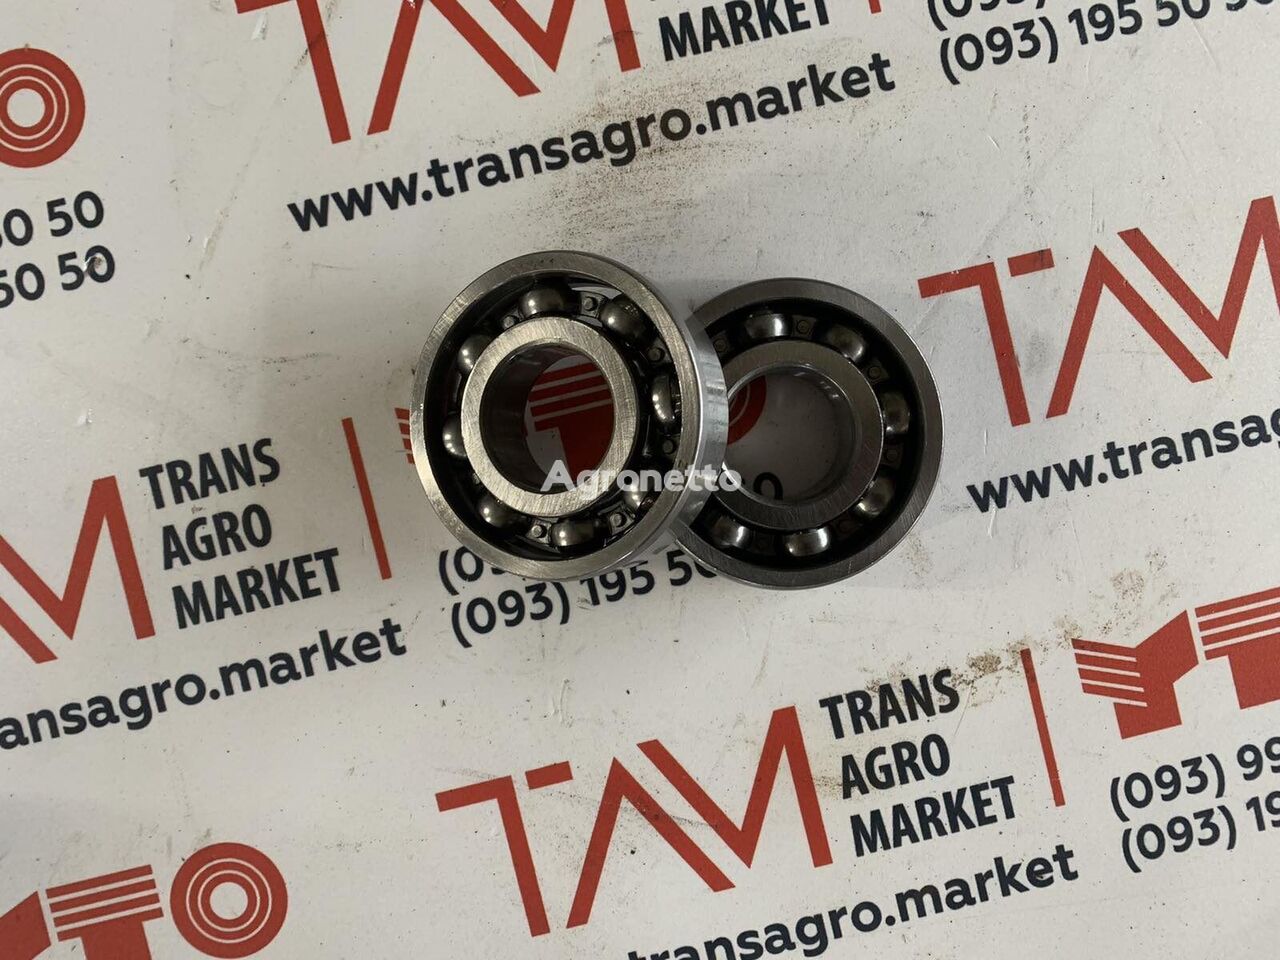 TAM 6306E(306E) bearing for X804/X904/LX954/NLX1024/NLX1054/X1204/NLX1304/NLX1404 wheel tractor